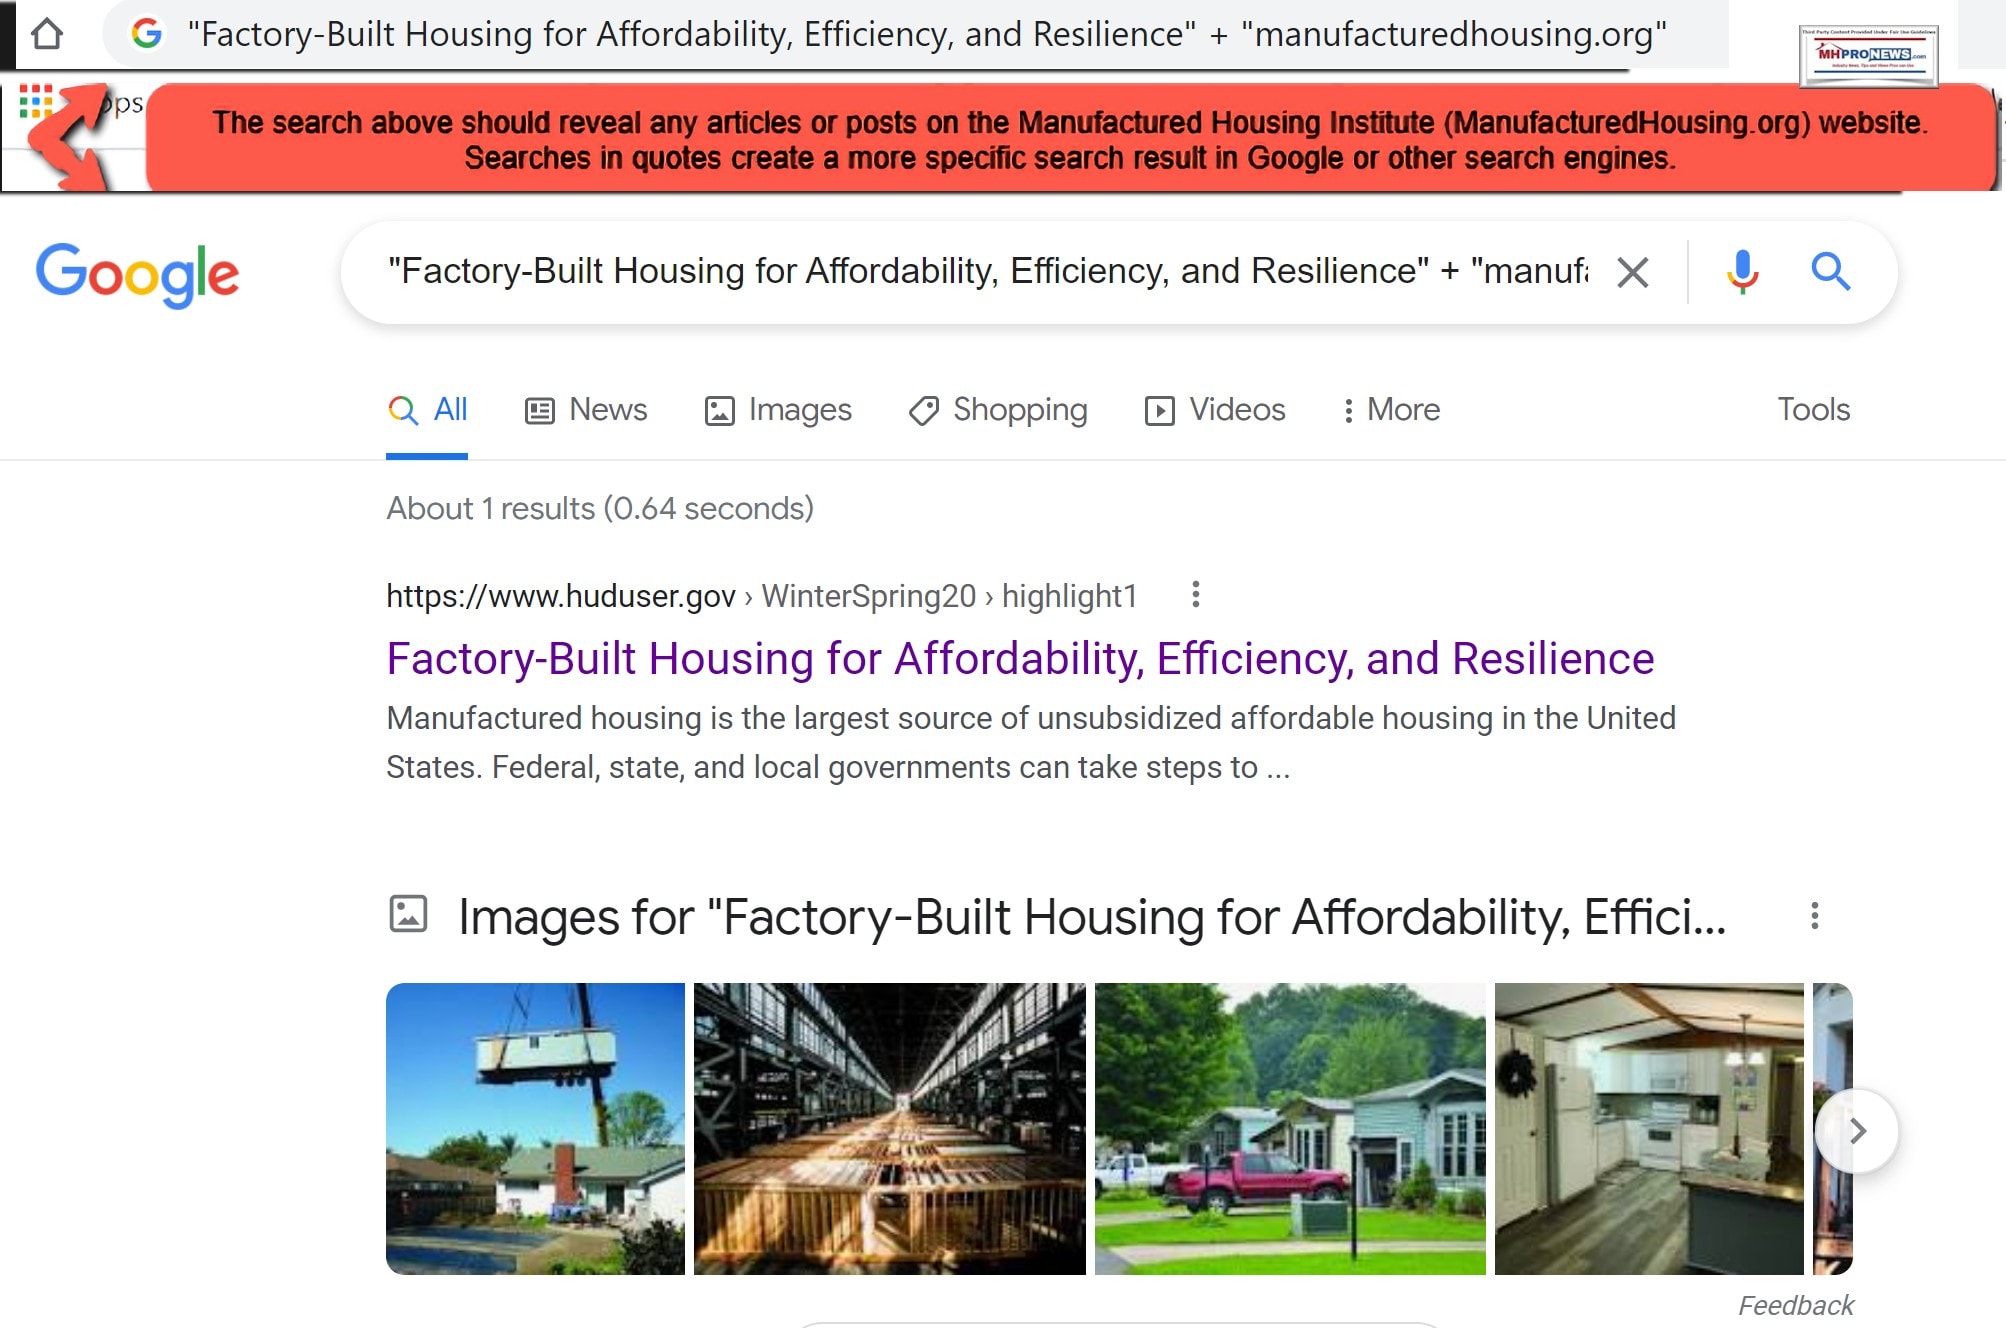 aHUDpdrFactoryBuiltHousingAffordabilityEfficiencyResilienceManufacturedHousing.orgSearch=MHIwebsite